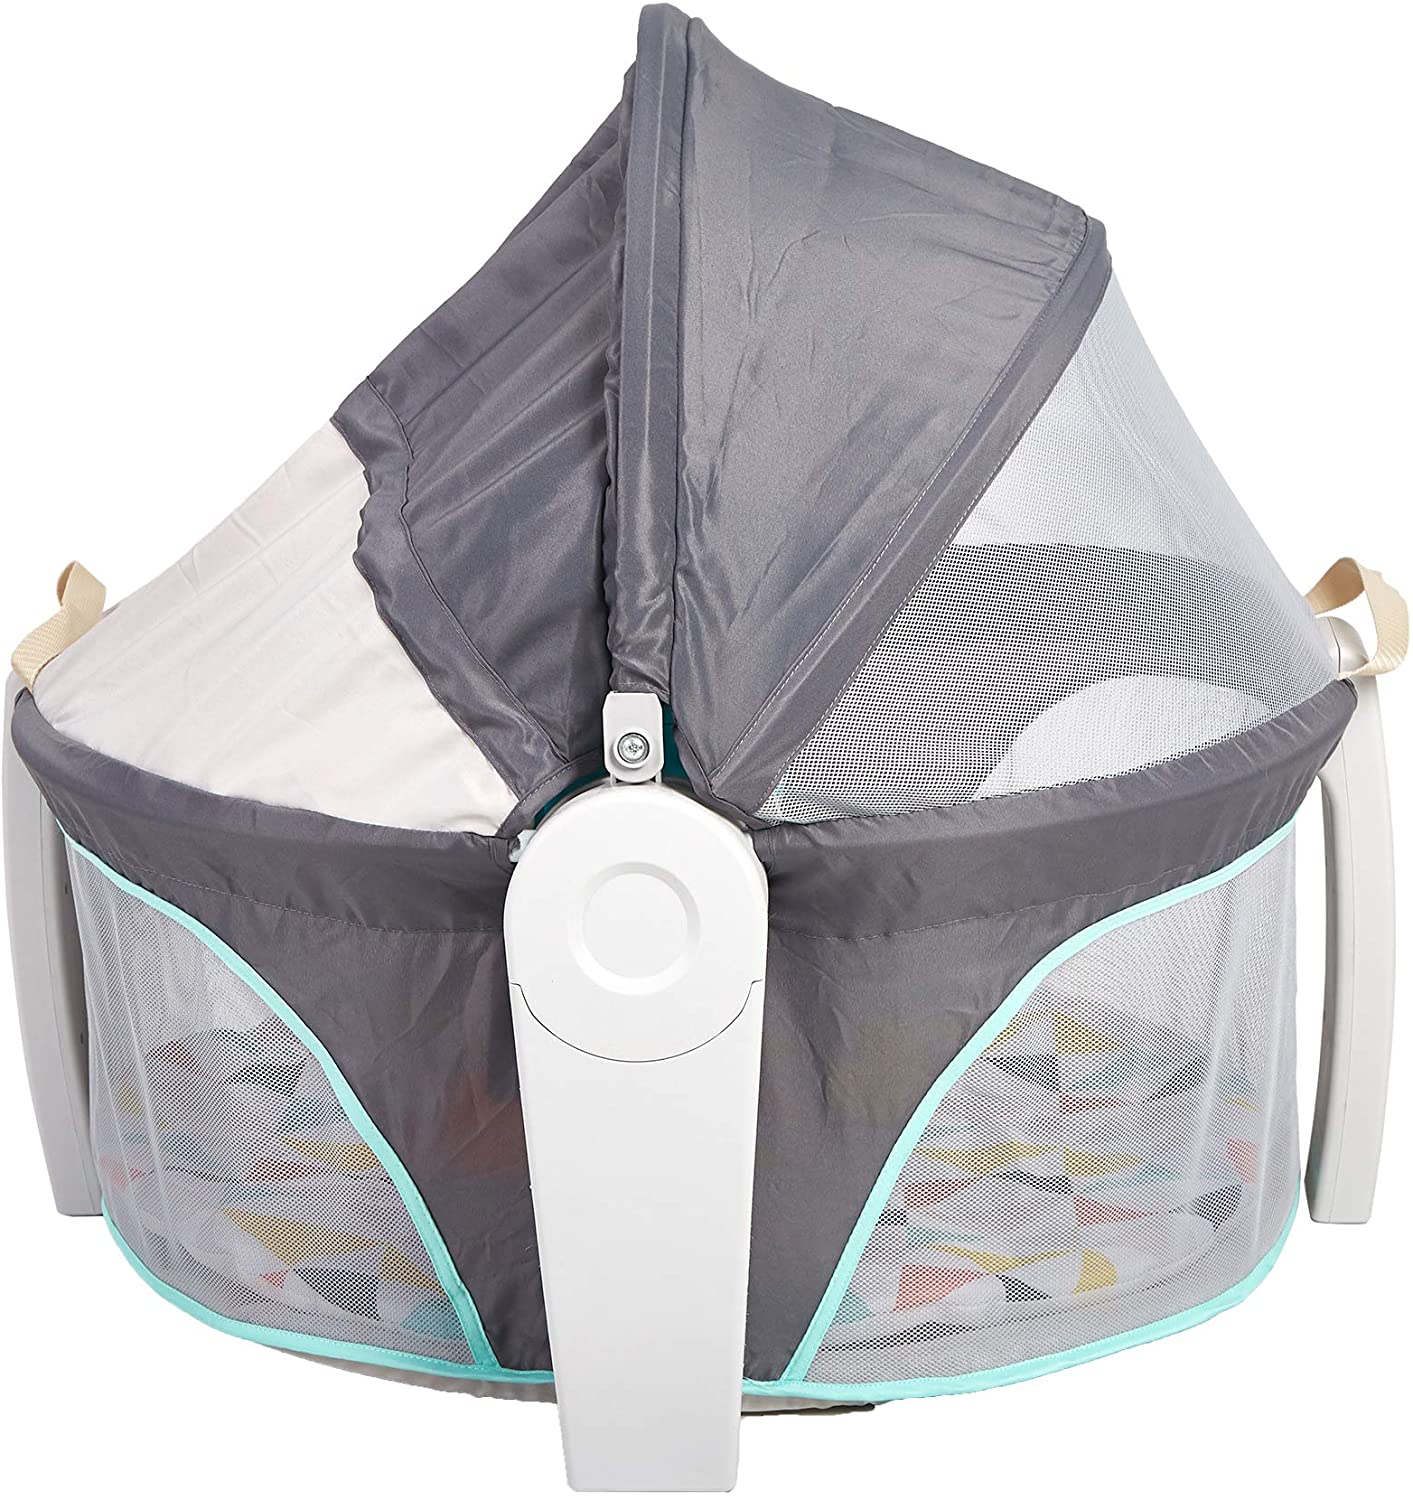 Travel Infant Bed Foldable Portable Baby Activity Center Combines Crib, Playpen and Game Room